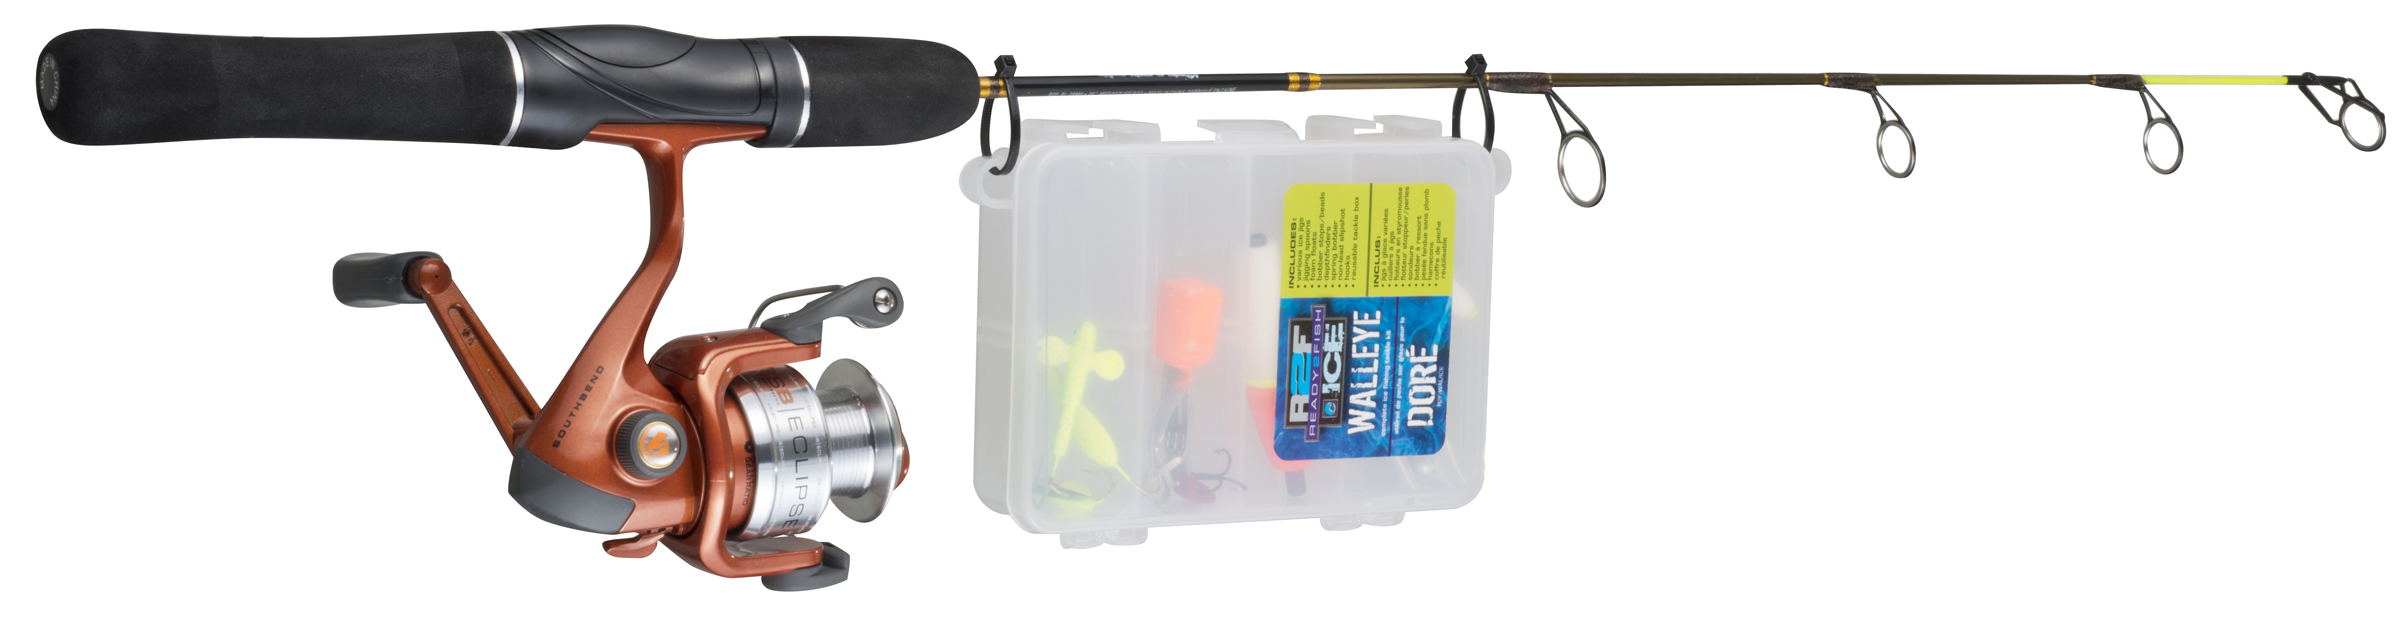 https://op2.0ps.us/original/opplanet-celsius-r2f-mltspc-ice-rod-reel-combo-with-kit-121292-main